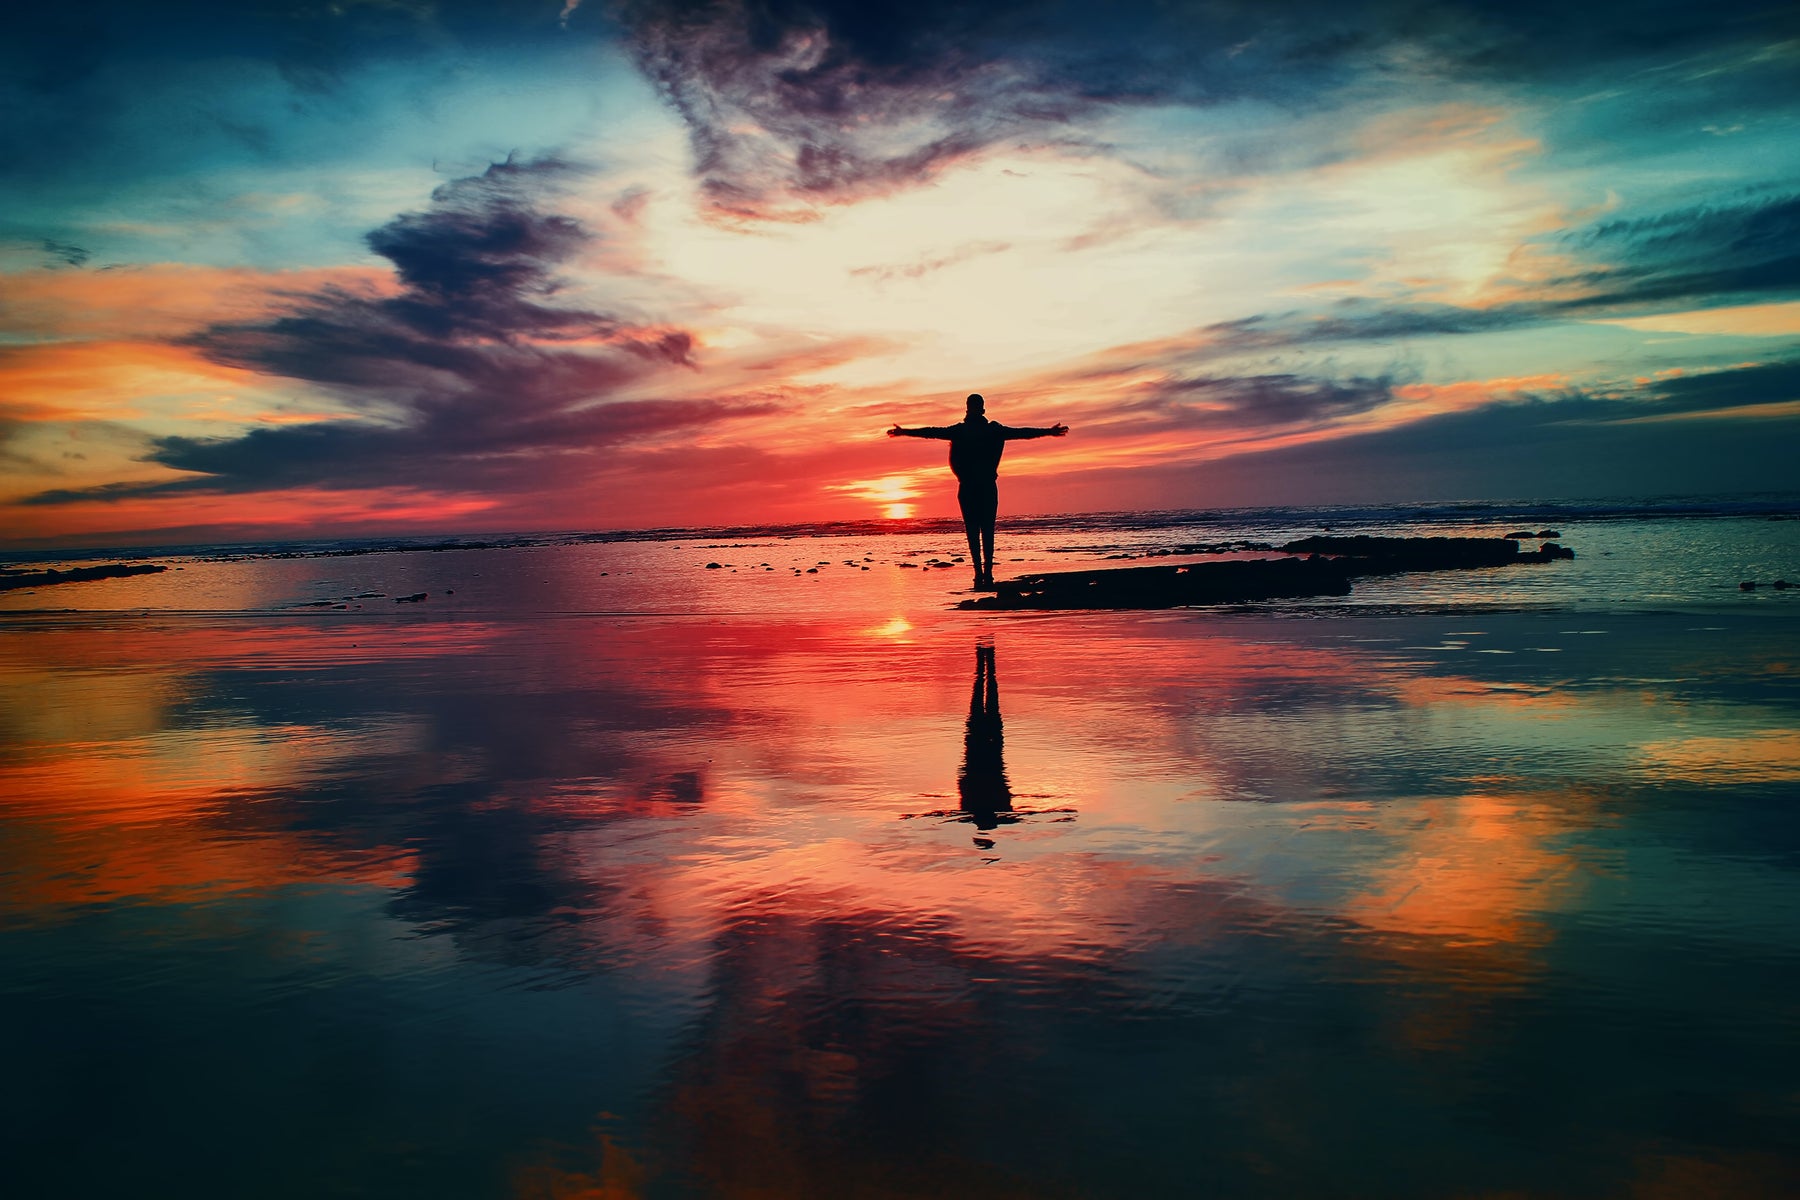 Colorful sunset reflecting on wet sand with a person's silhouette and arms outstretched